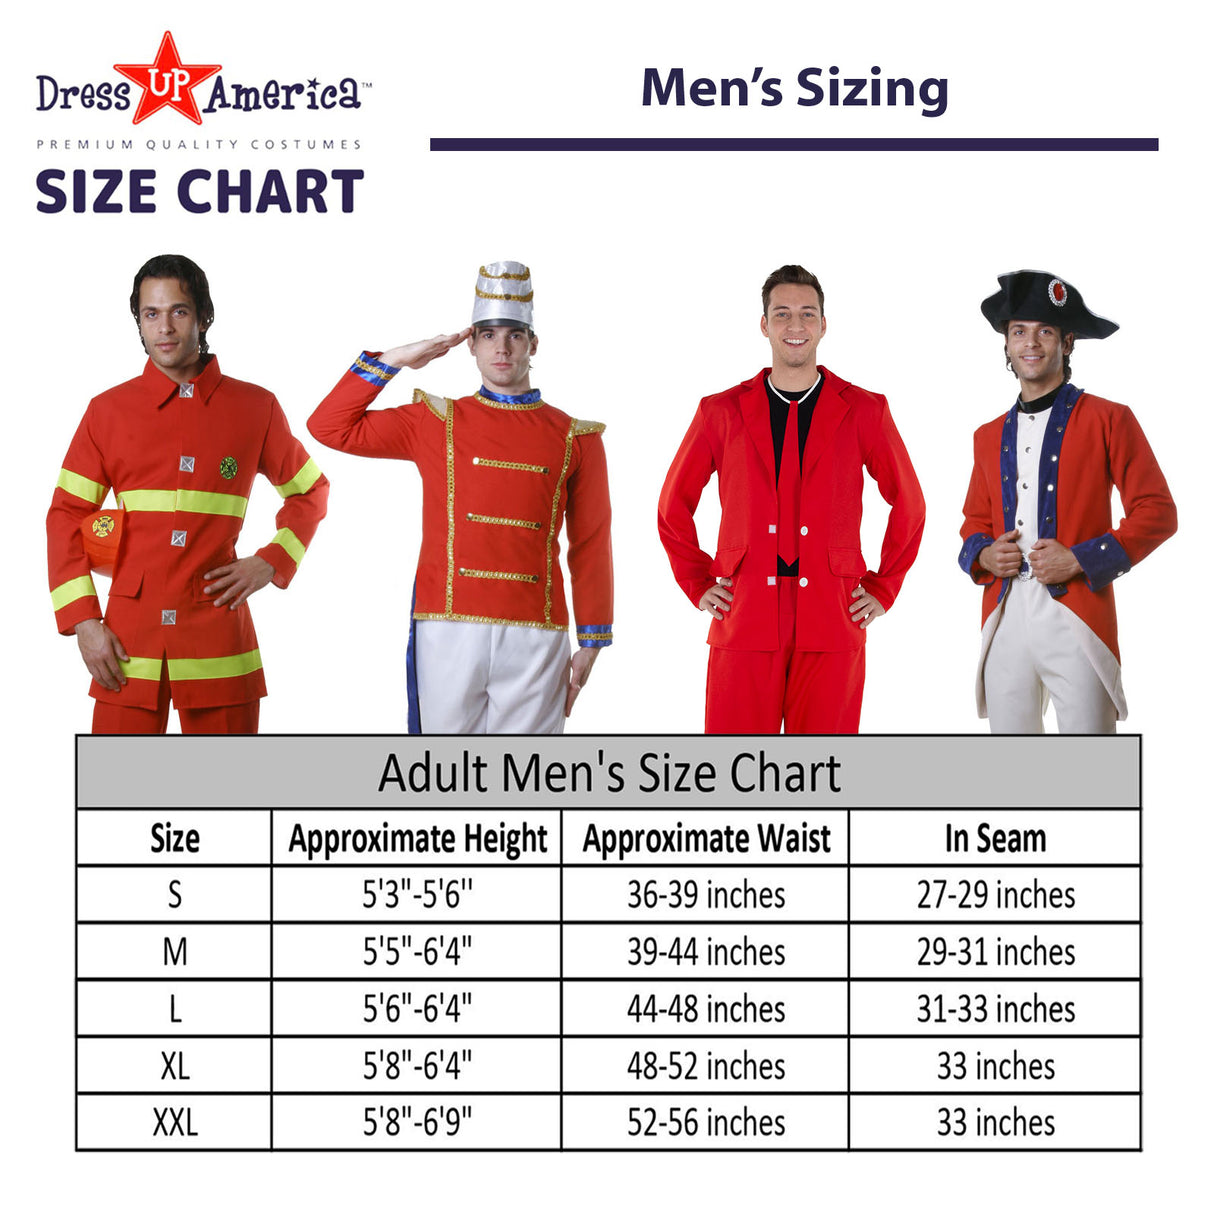 Police Costume - Adults